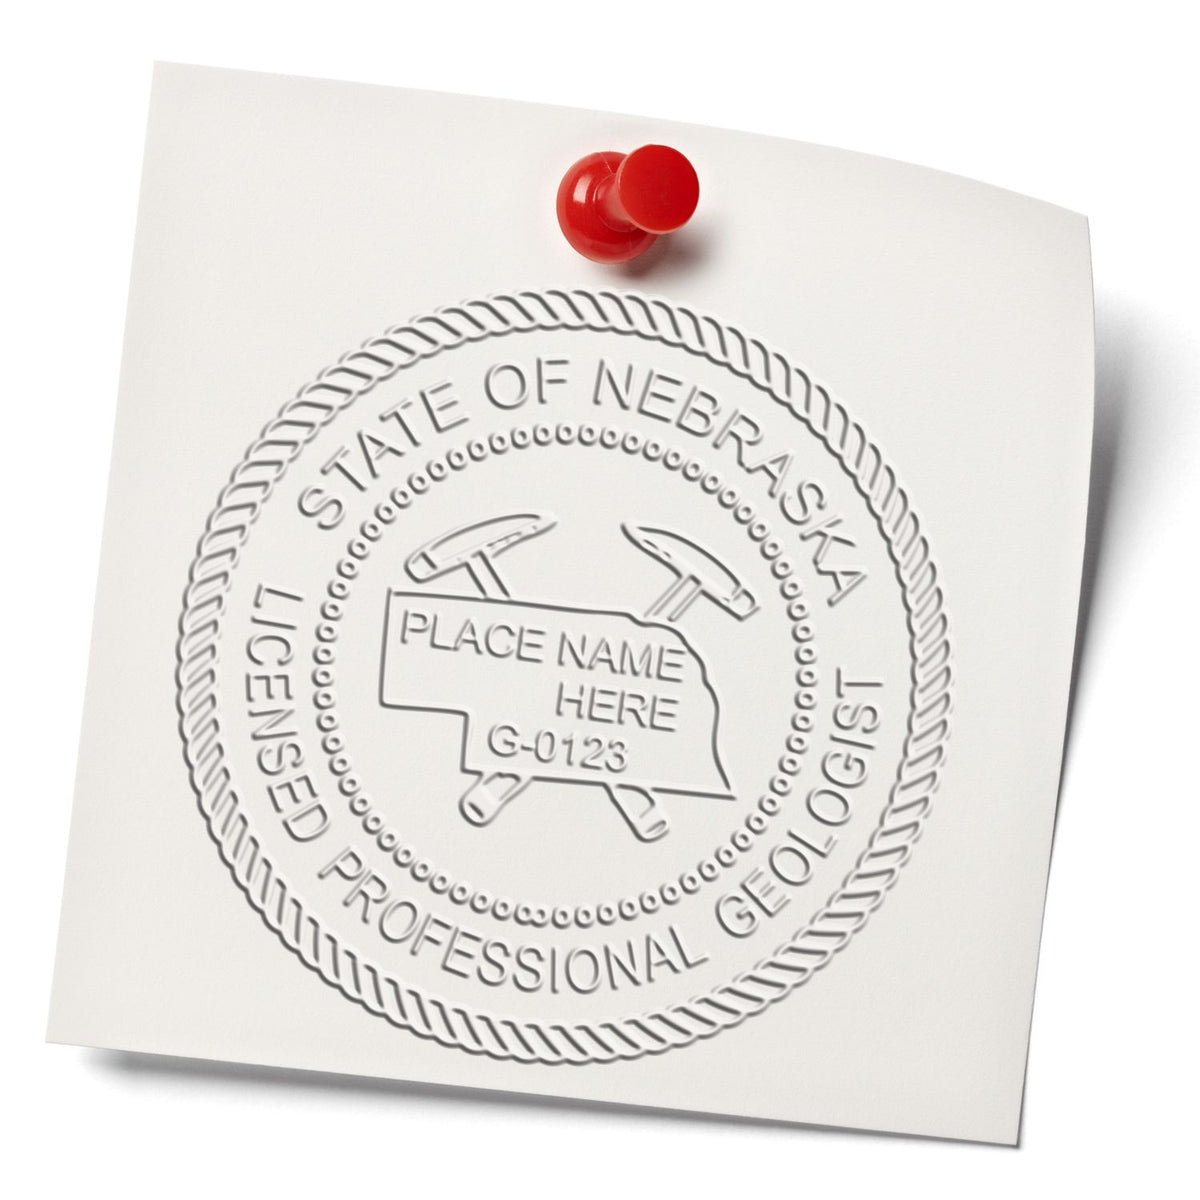 An in use photo of the Gift Nebraska Geologist Seal showing a sample imprint on a cardstock